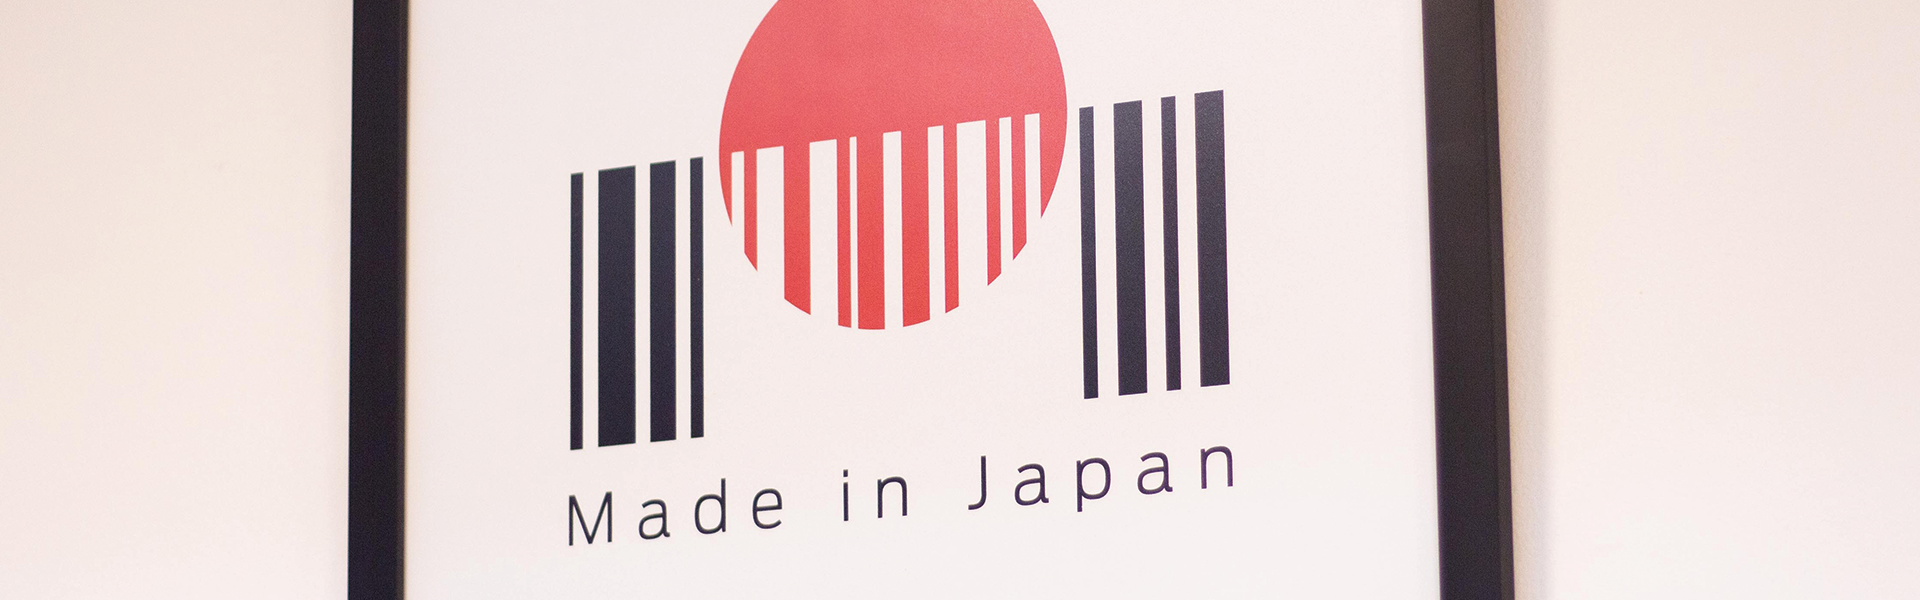 Made-in-Japan